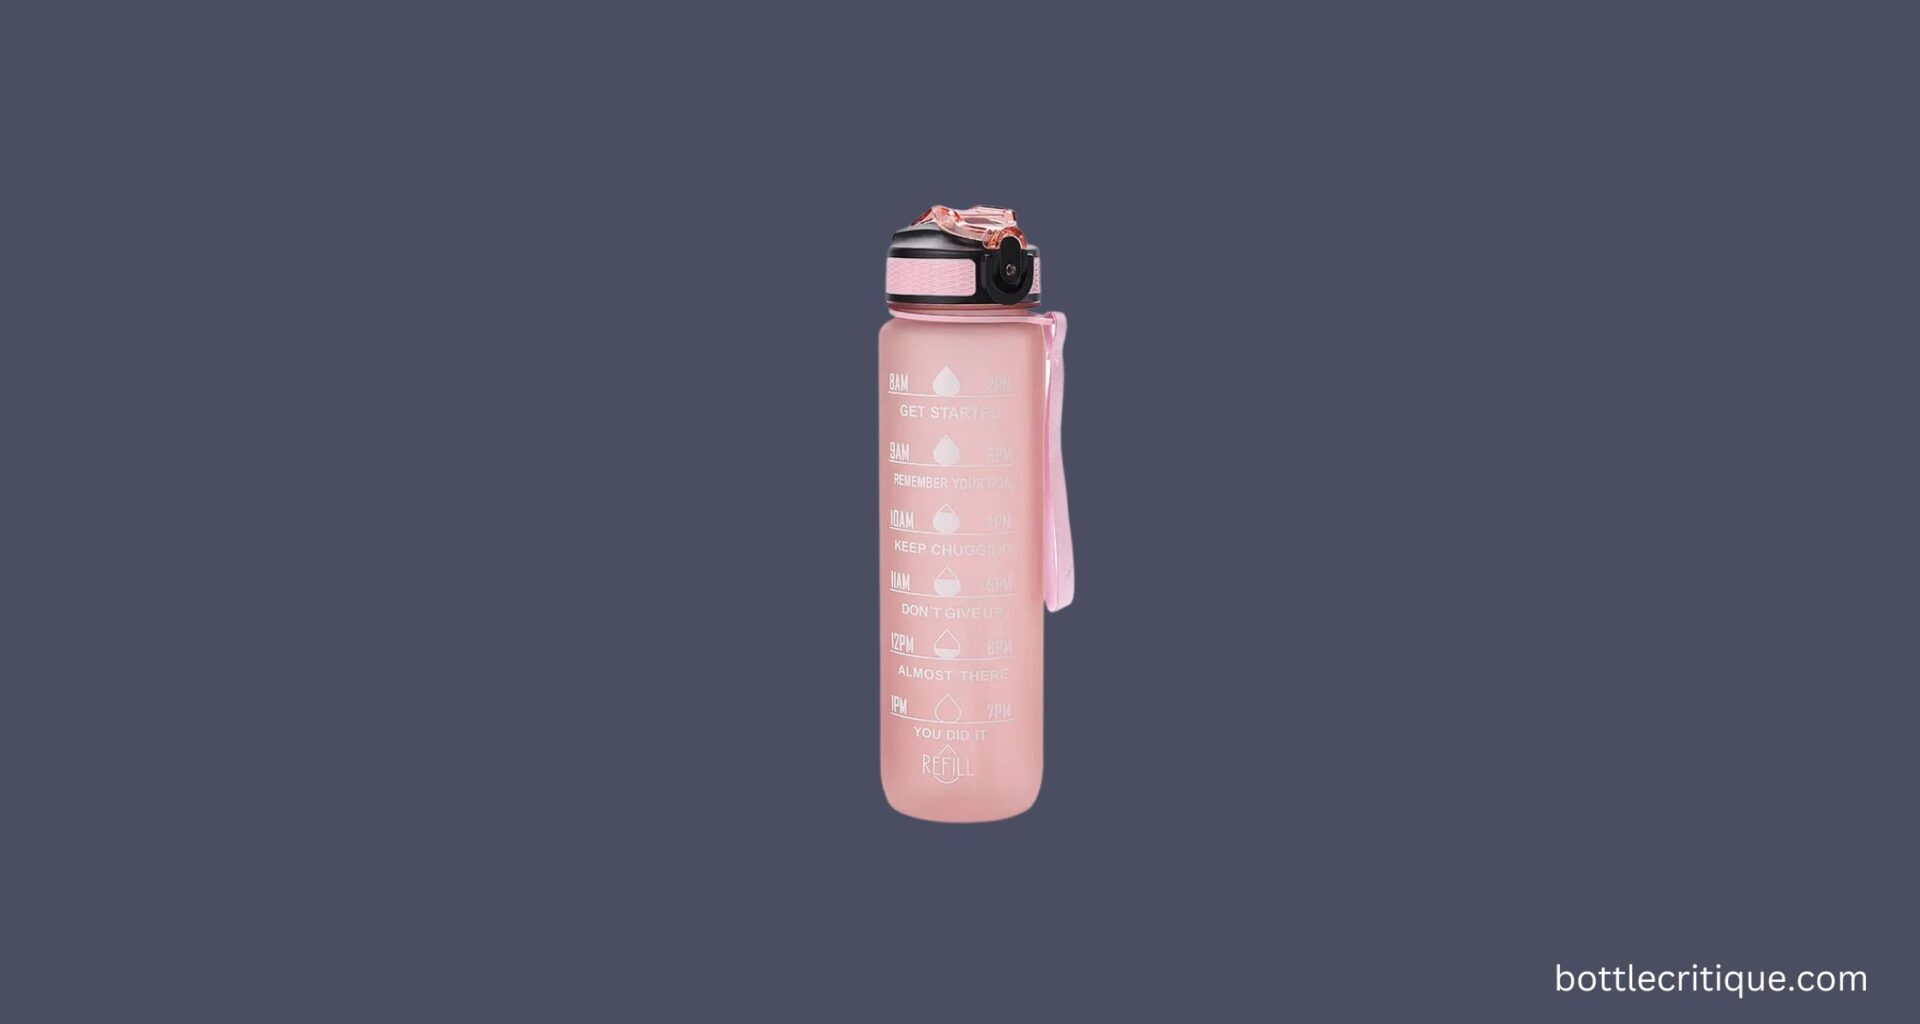 How to Use Tritan Water Bottle?